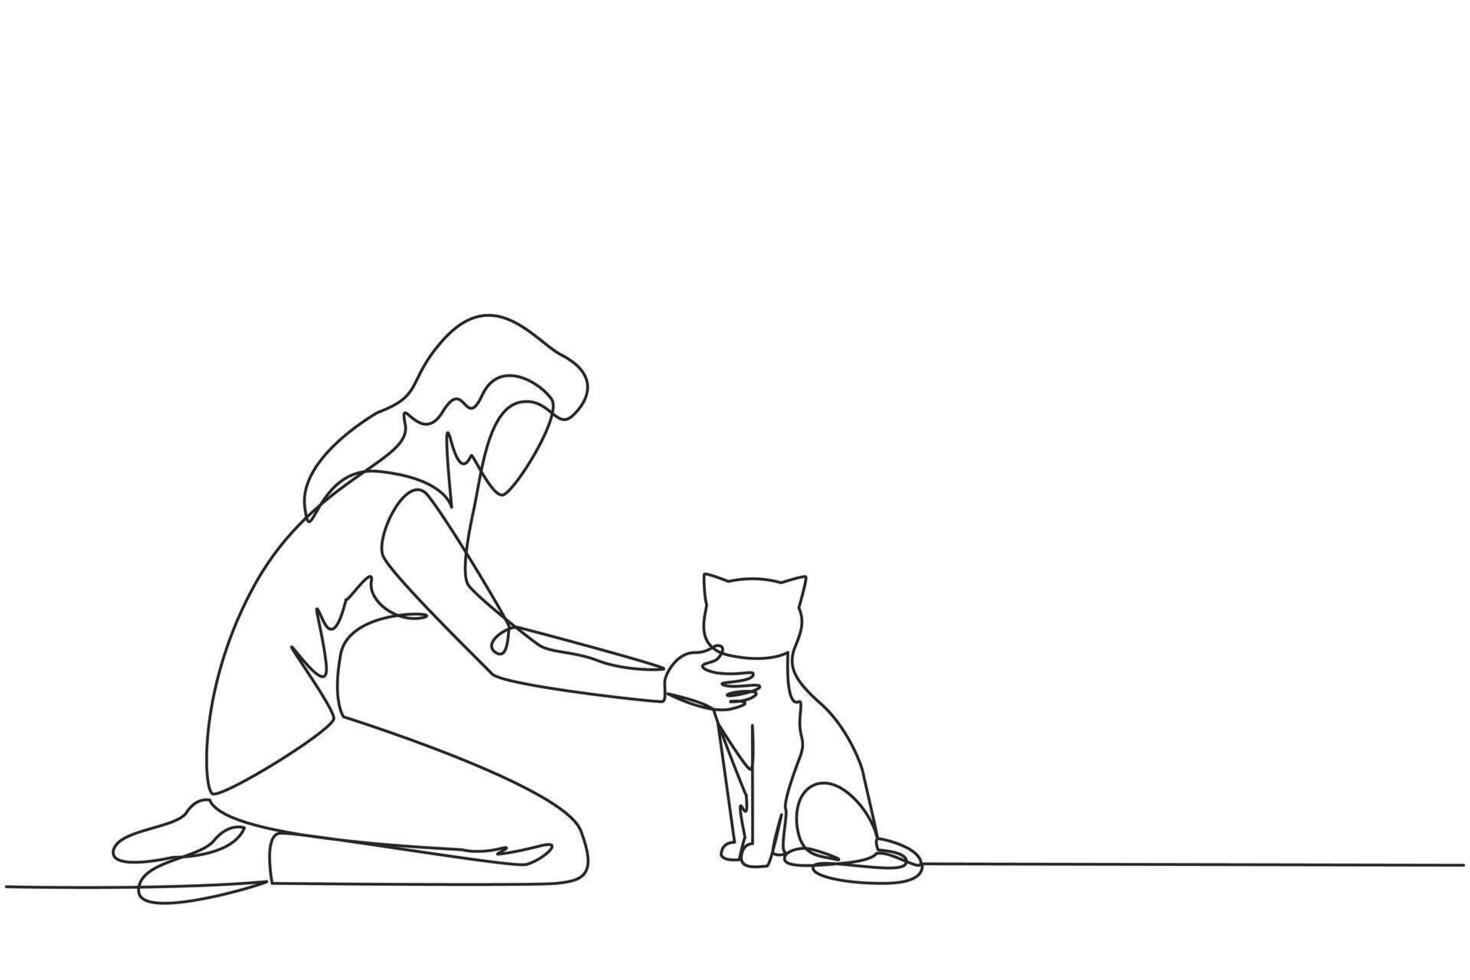 Single one line drawing of young beautiful woman hugging her little cat. While kneeling, he put his cute cat on the floor while stroking it on the neck. Continuous line design graphic illustration vector